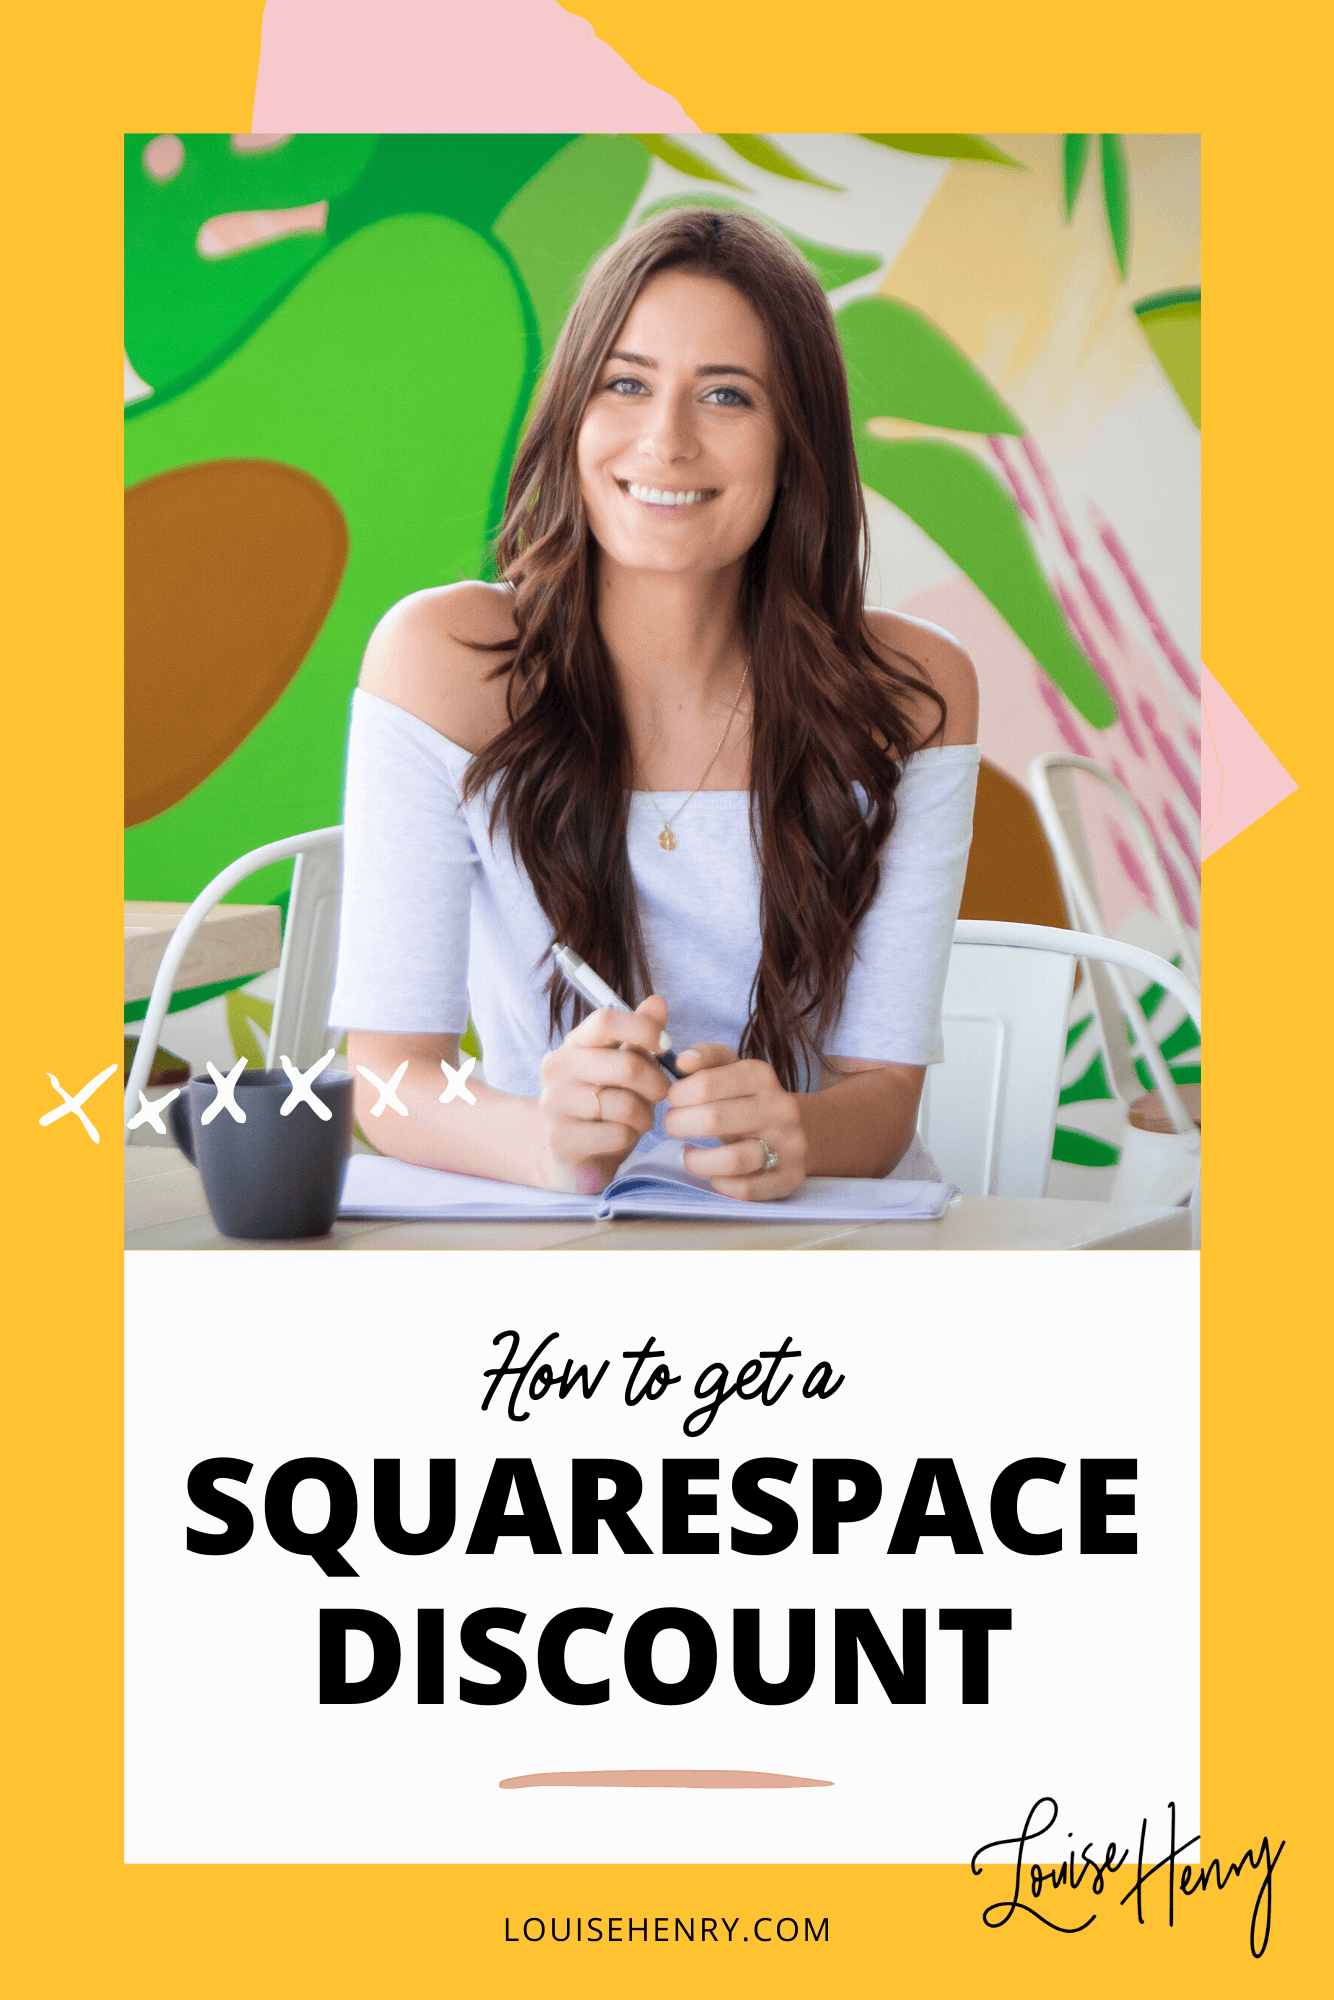 How to Get a Squarespace Discount (Squarespace Promo Code) — Louise